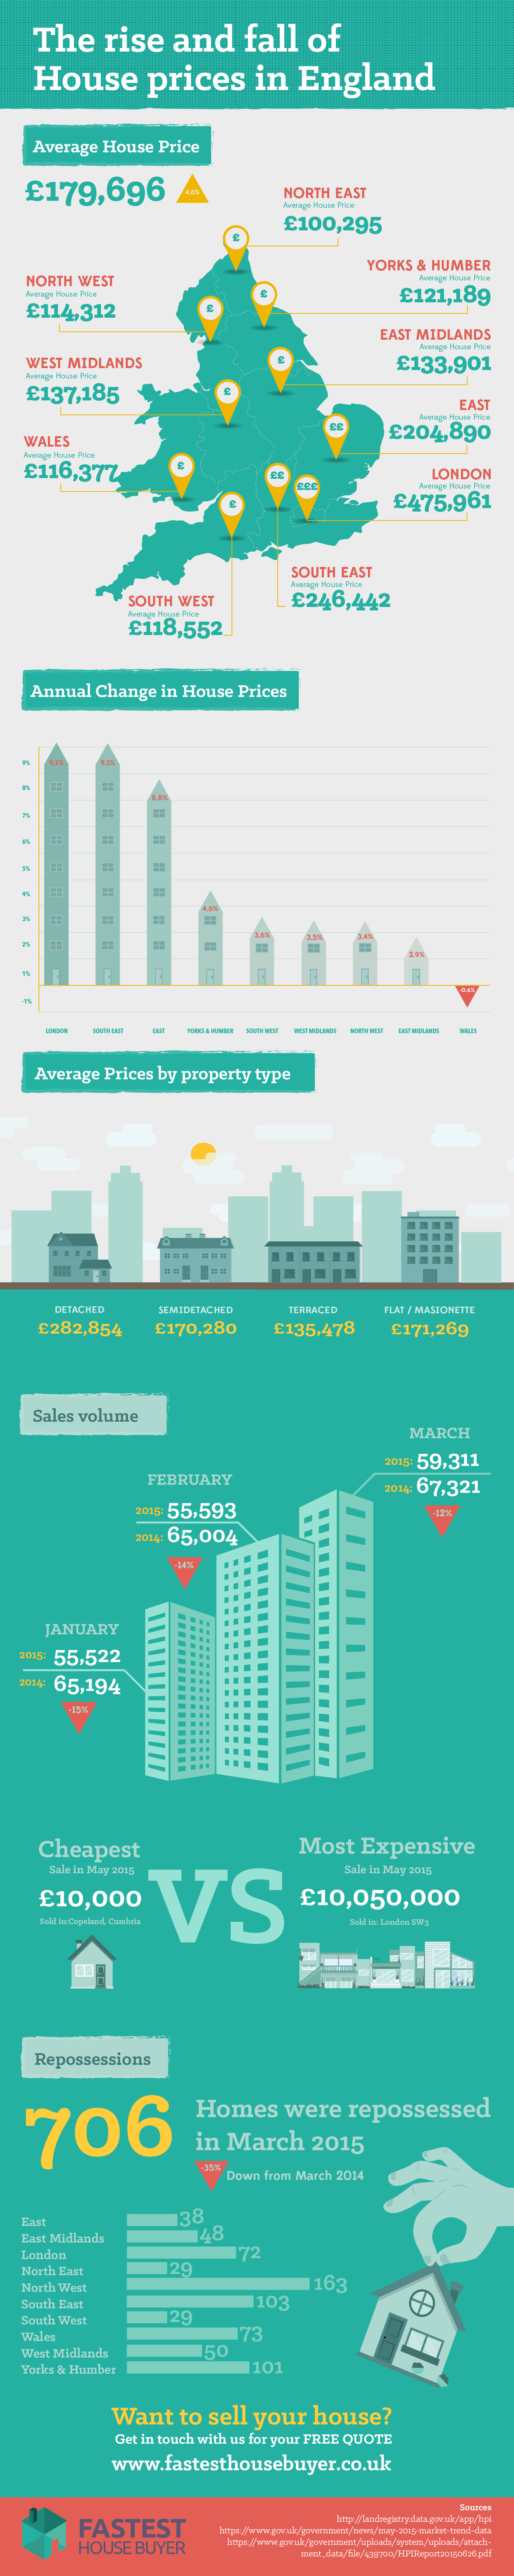 The Rise and Fall of House Prices in England by Fastesthousebuyer.co.uk